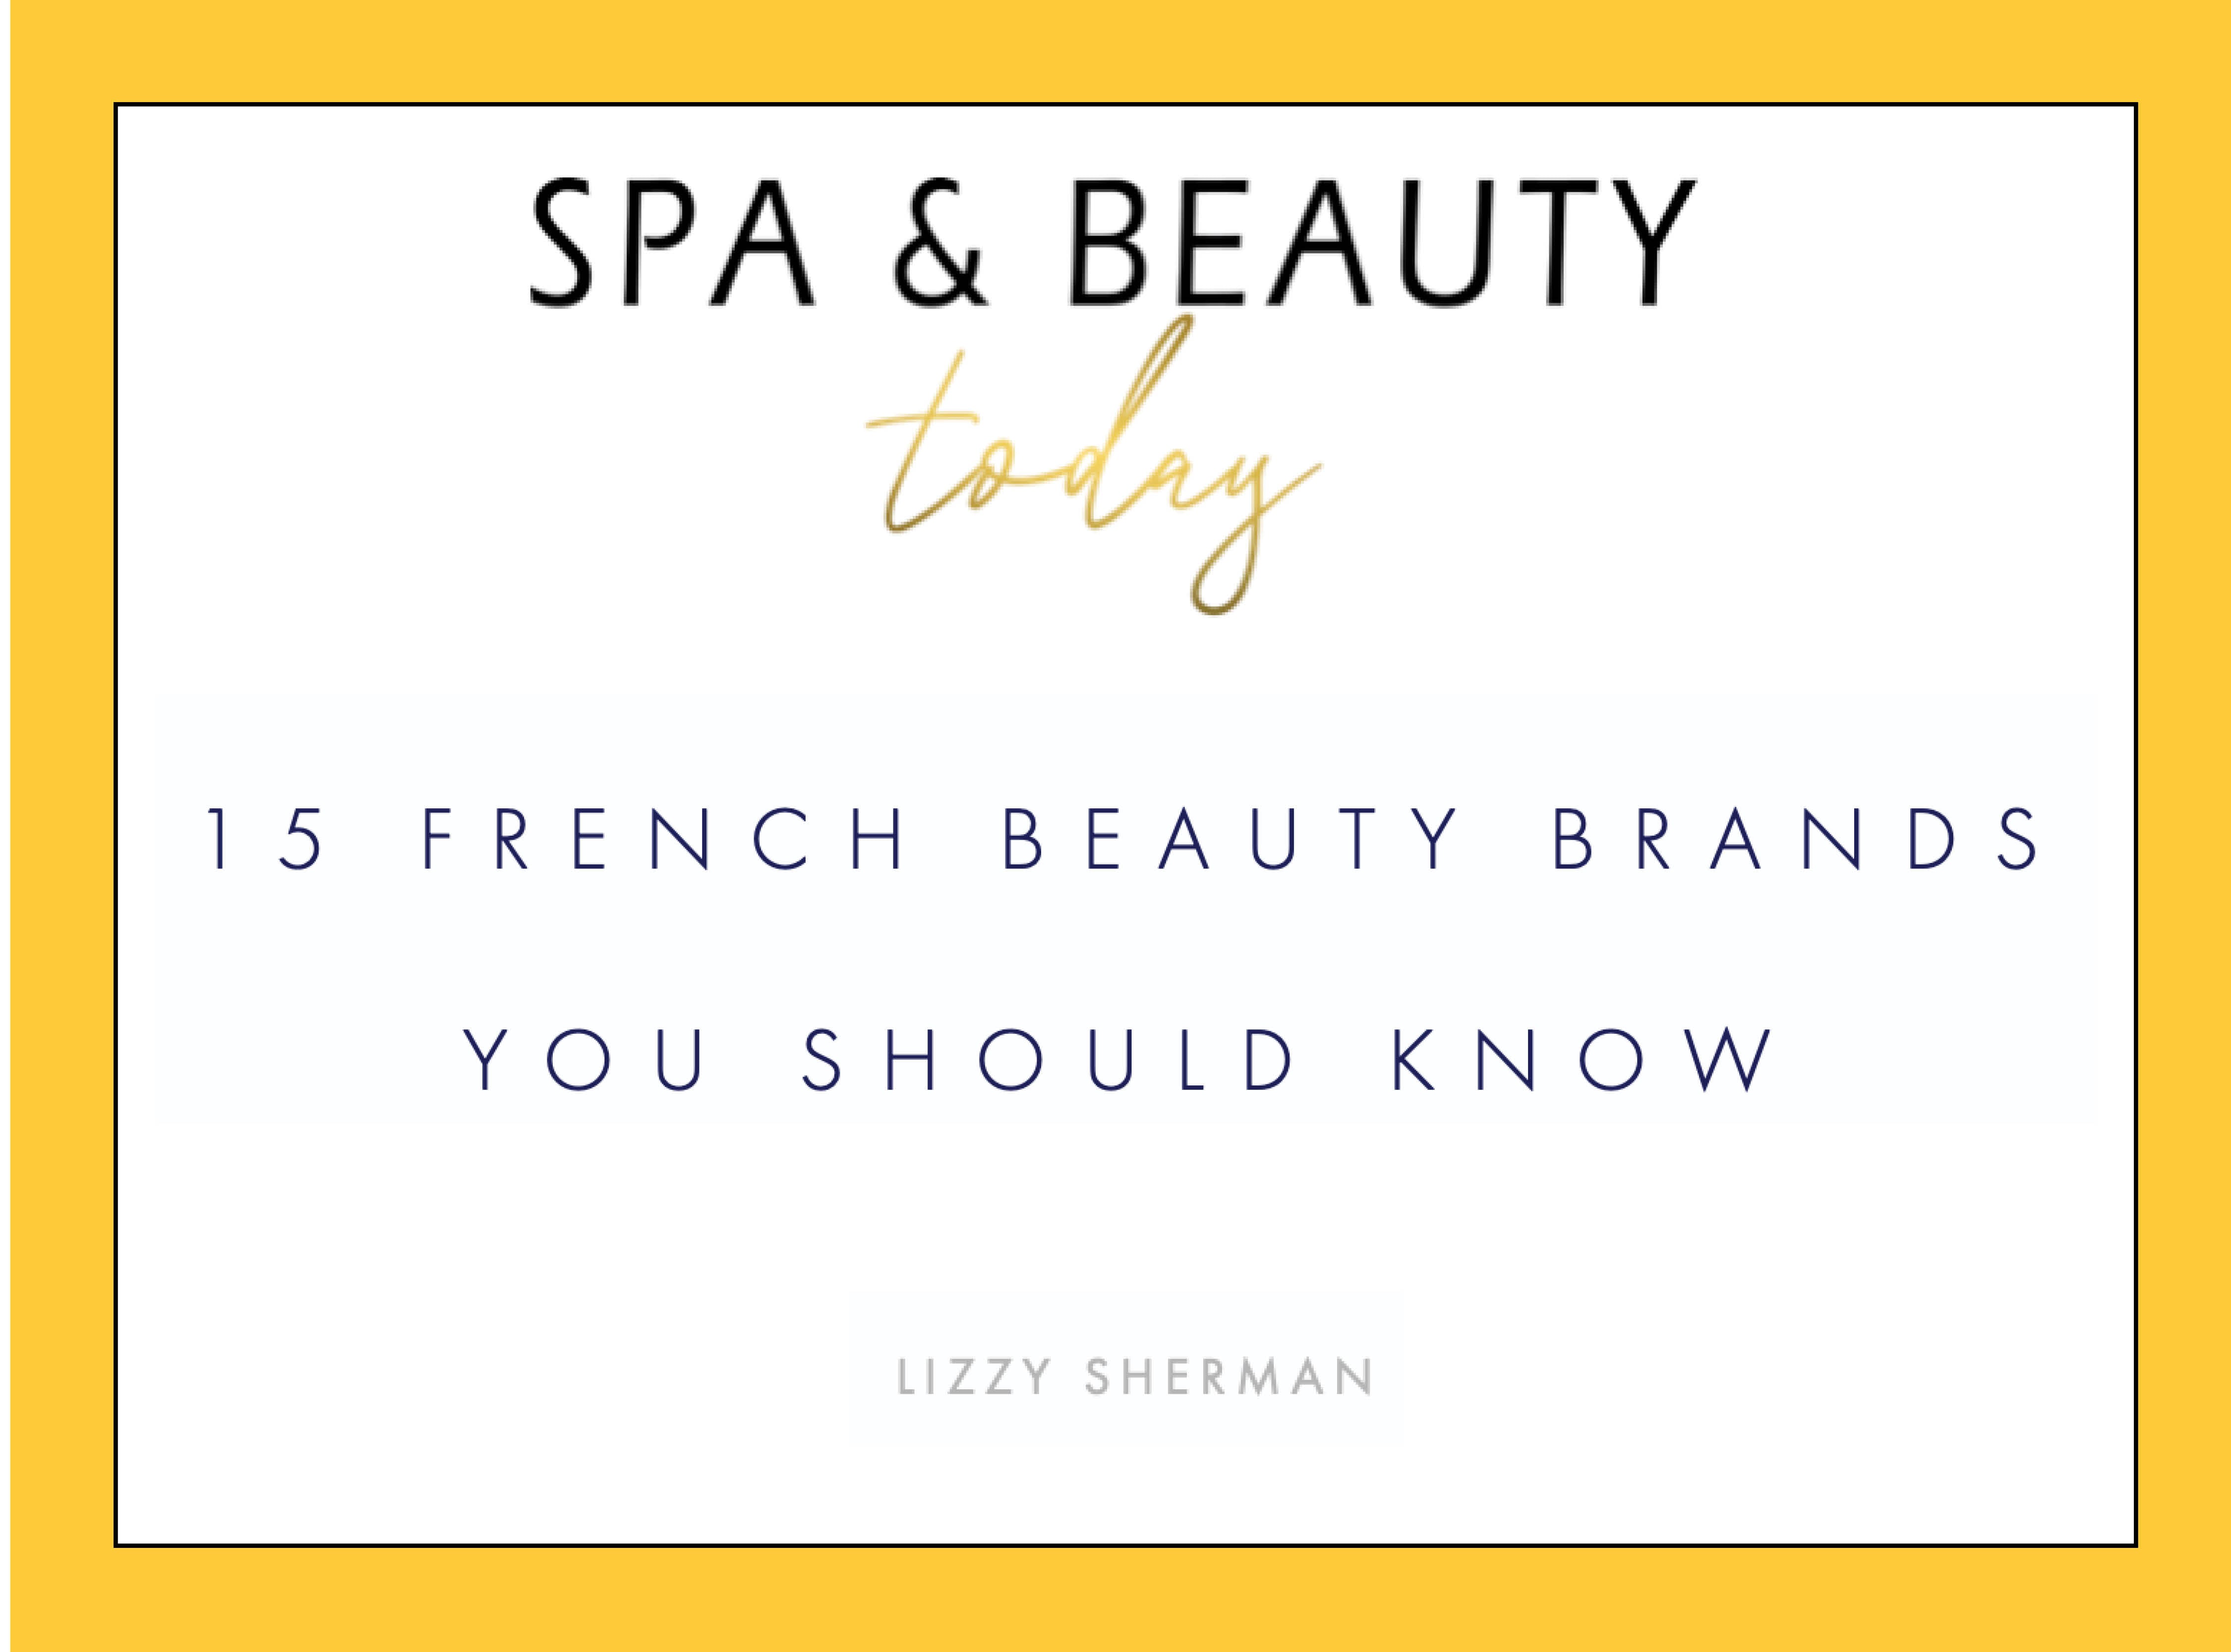 French beauty brands you should know.